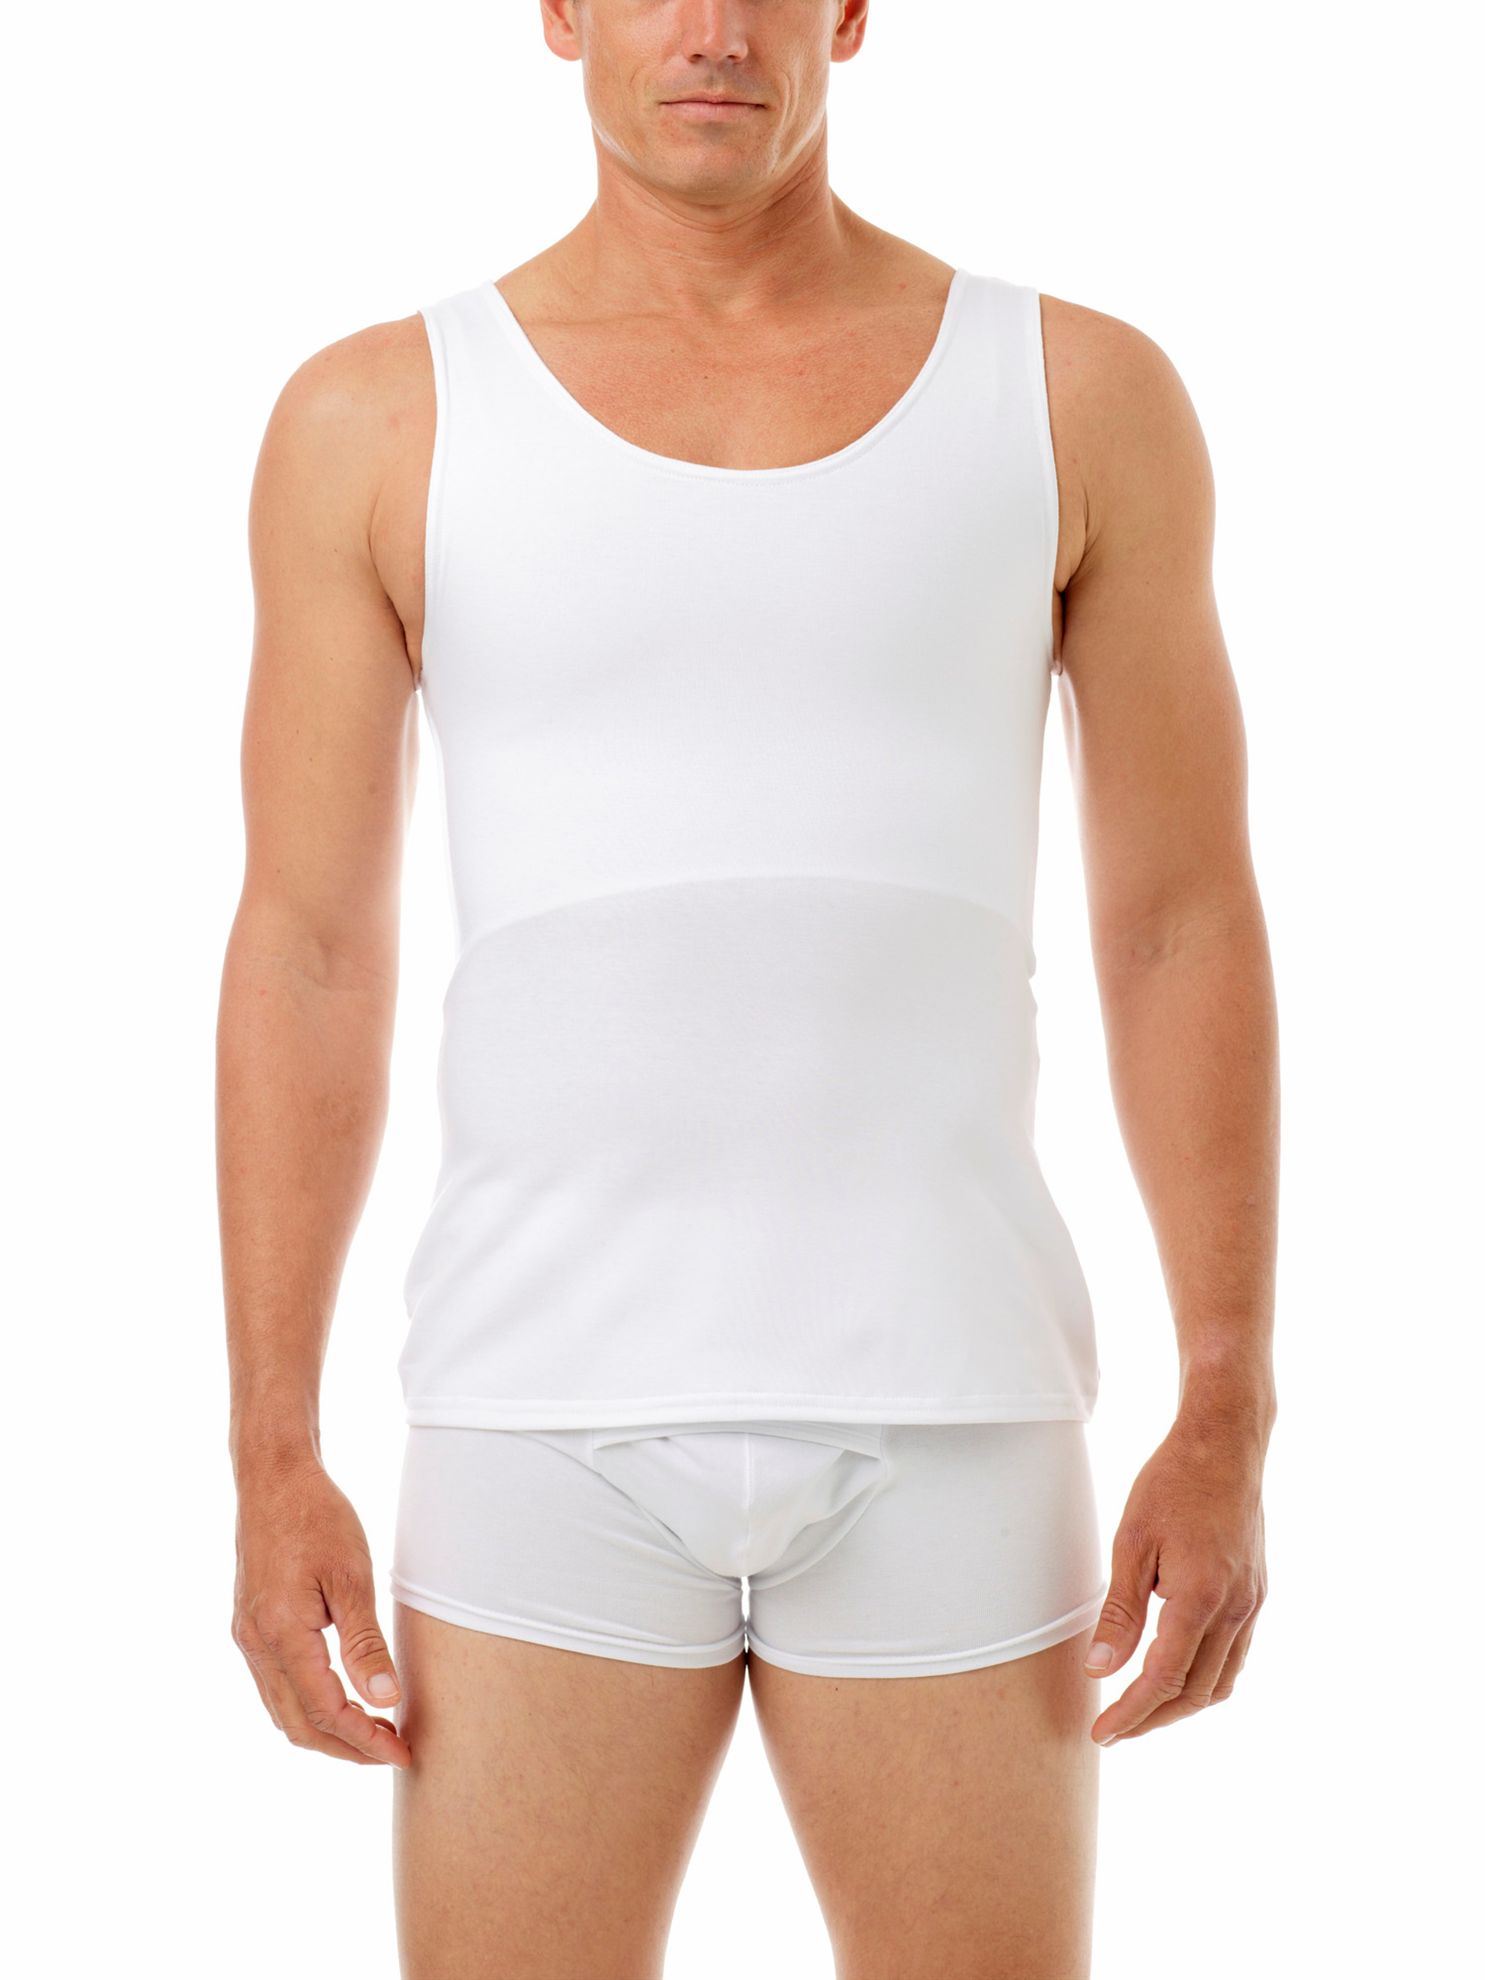 Just learned that Underworks has an outlet tab, where they sell the  compression top binders for $10 (reg. $33) : r/ftm